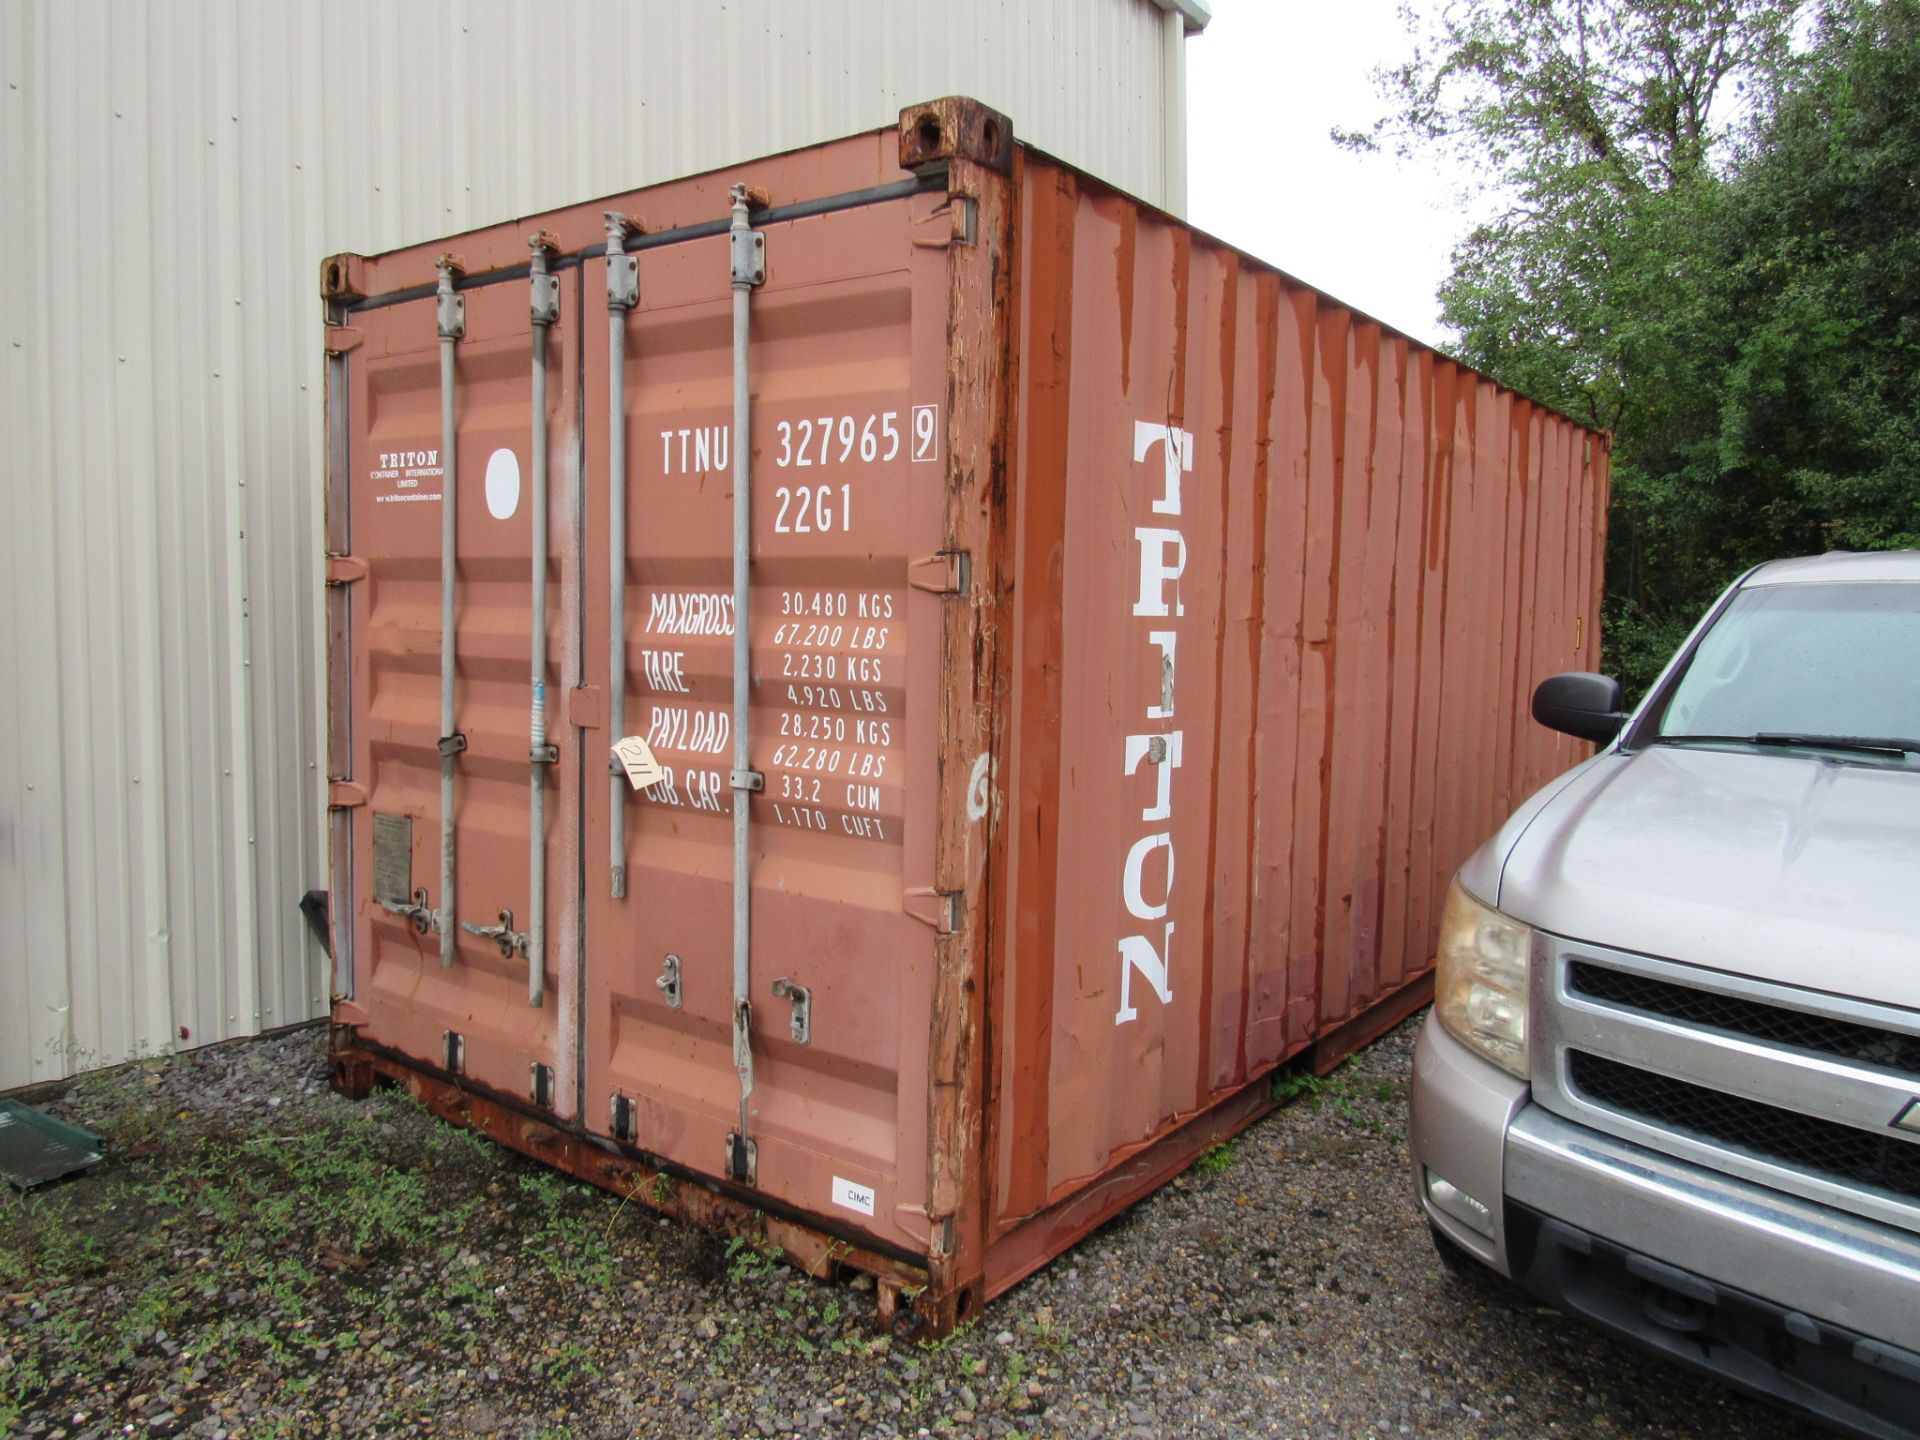 Triton TTNU32796522G1 Shipping Container with Skids & Totes **formally lots 211,212,213** ** - Image 2 of 7